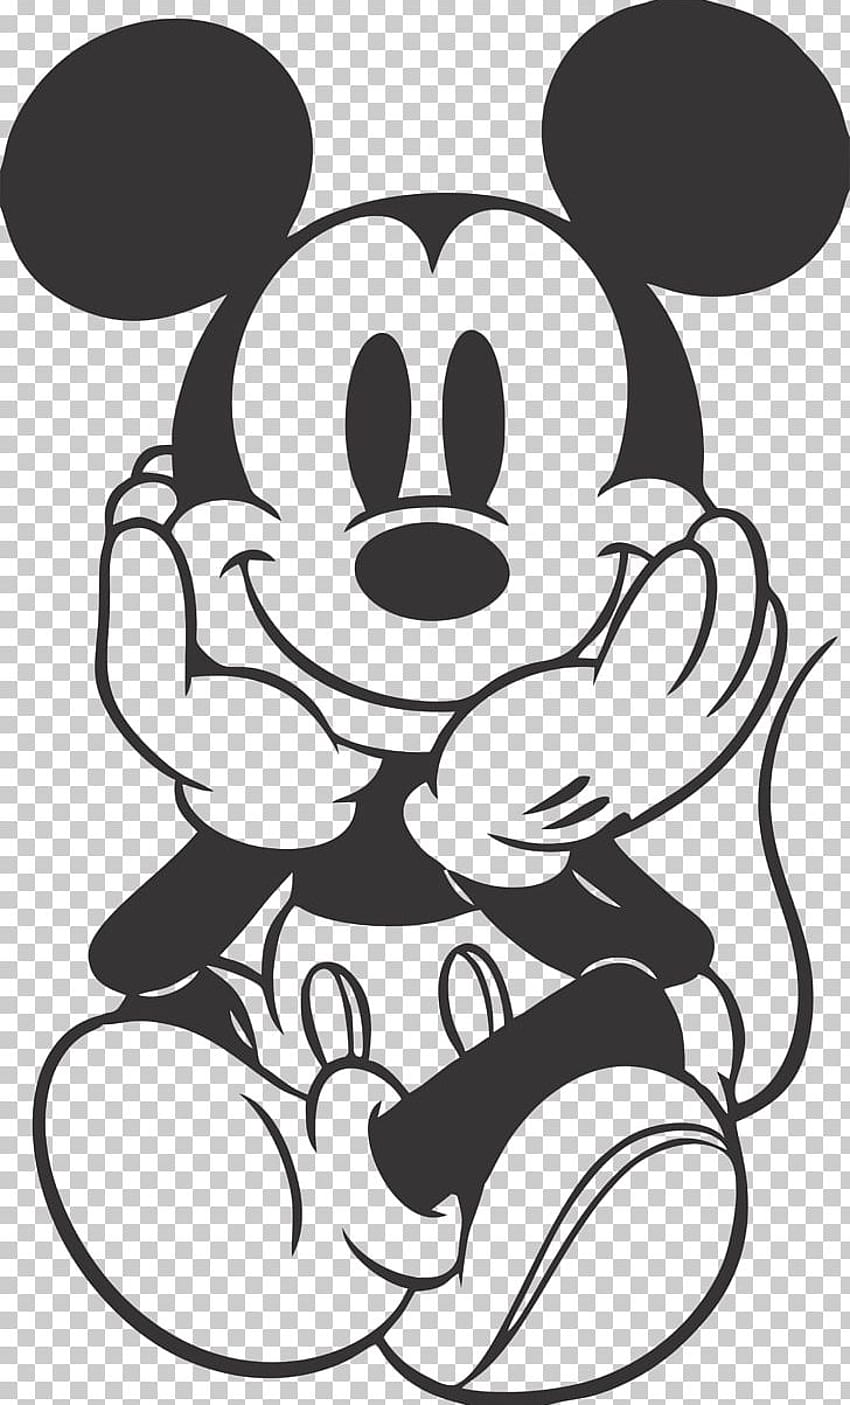 How To Draw Mickey Mouse Body @ Howtodraw.pics